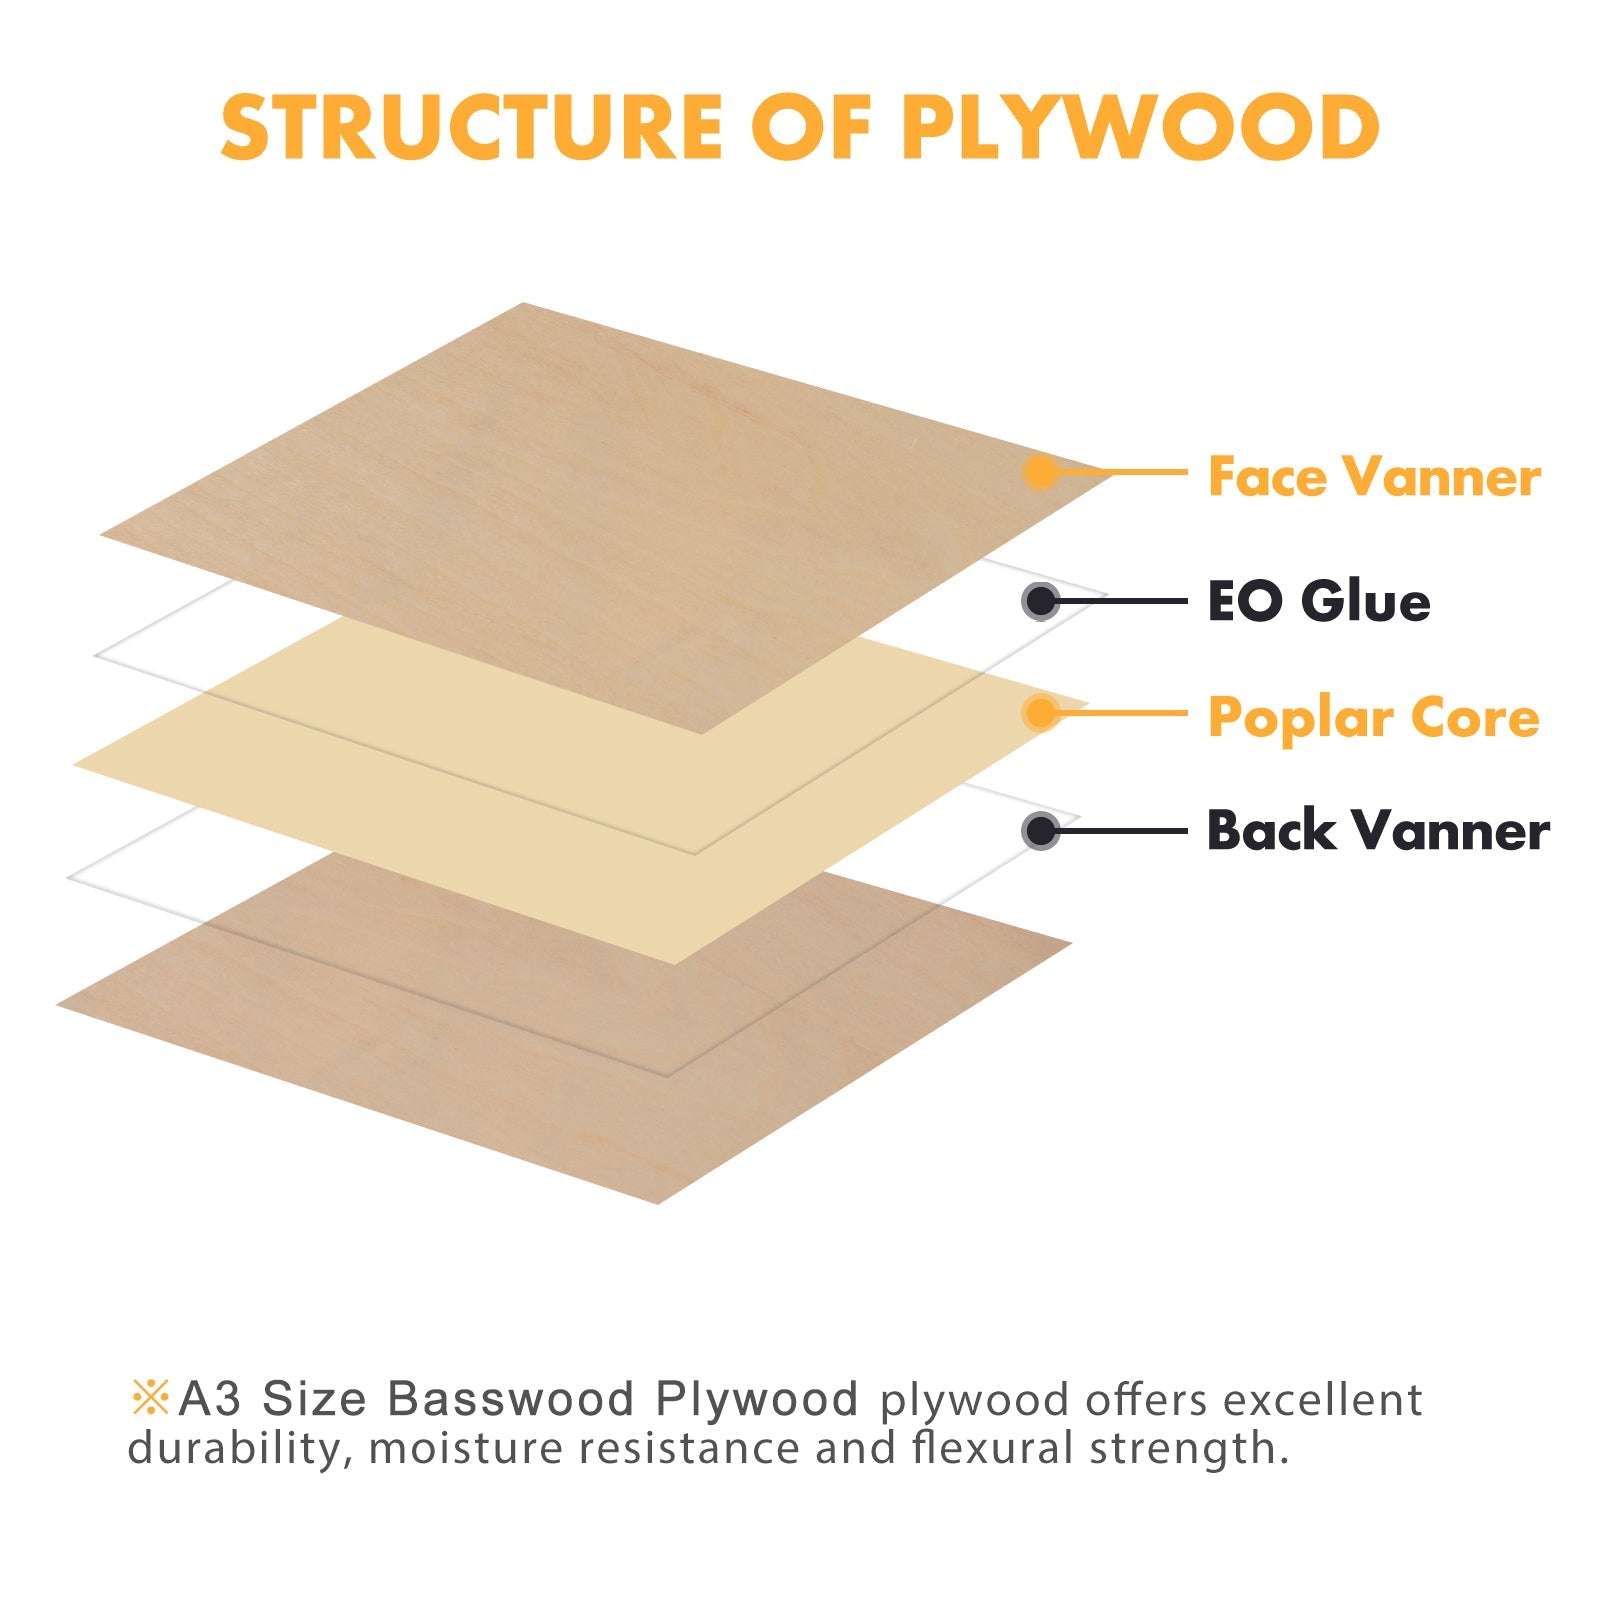 A3 basswodd plywood sheets